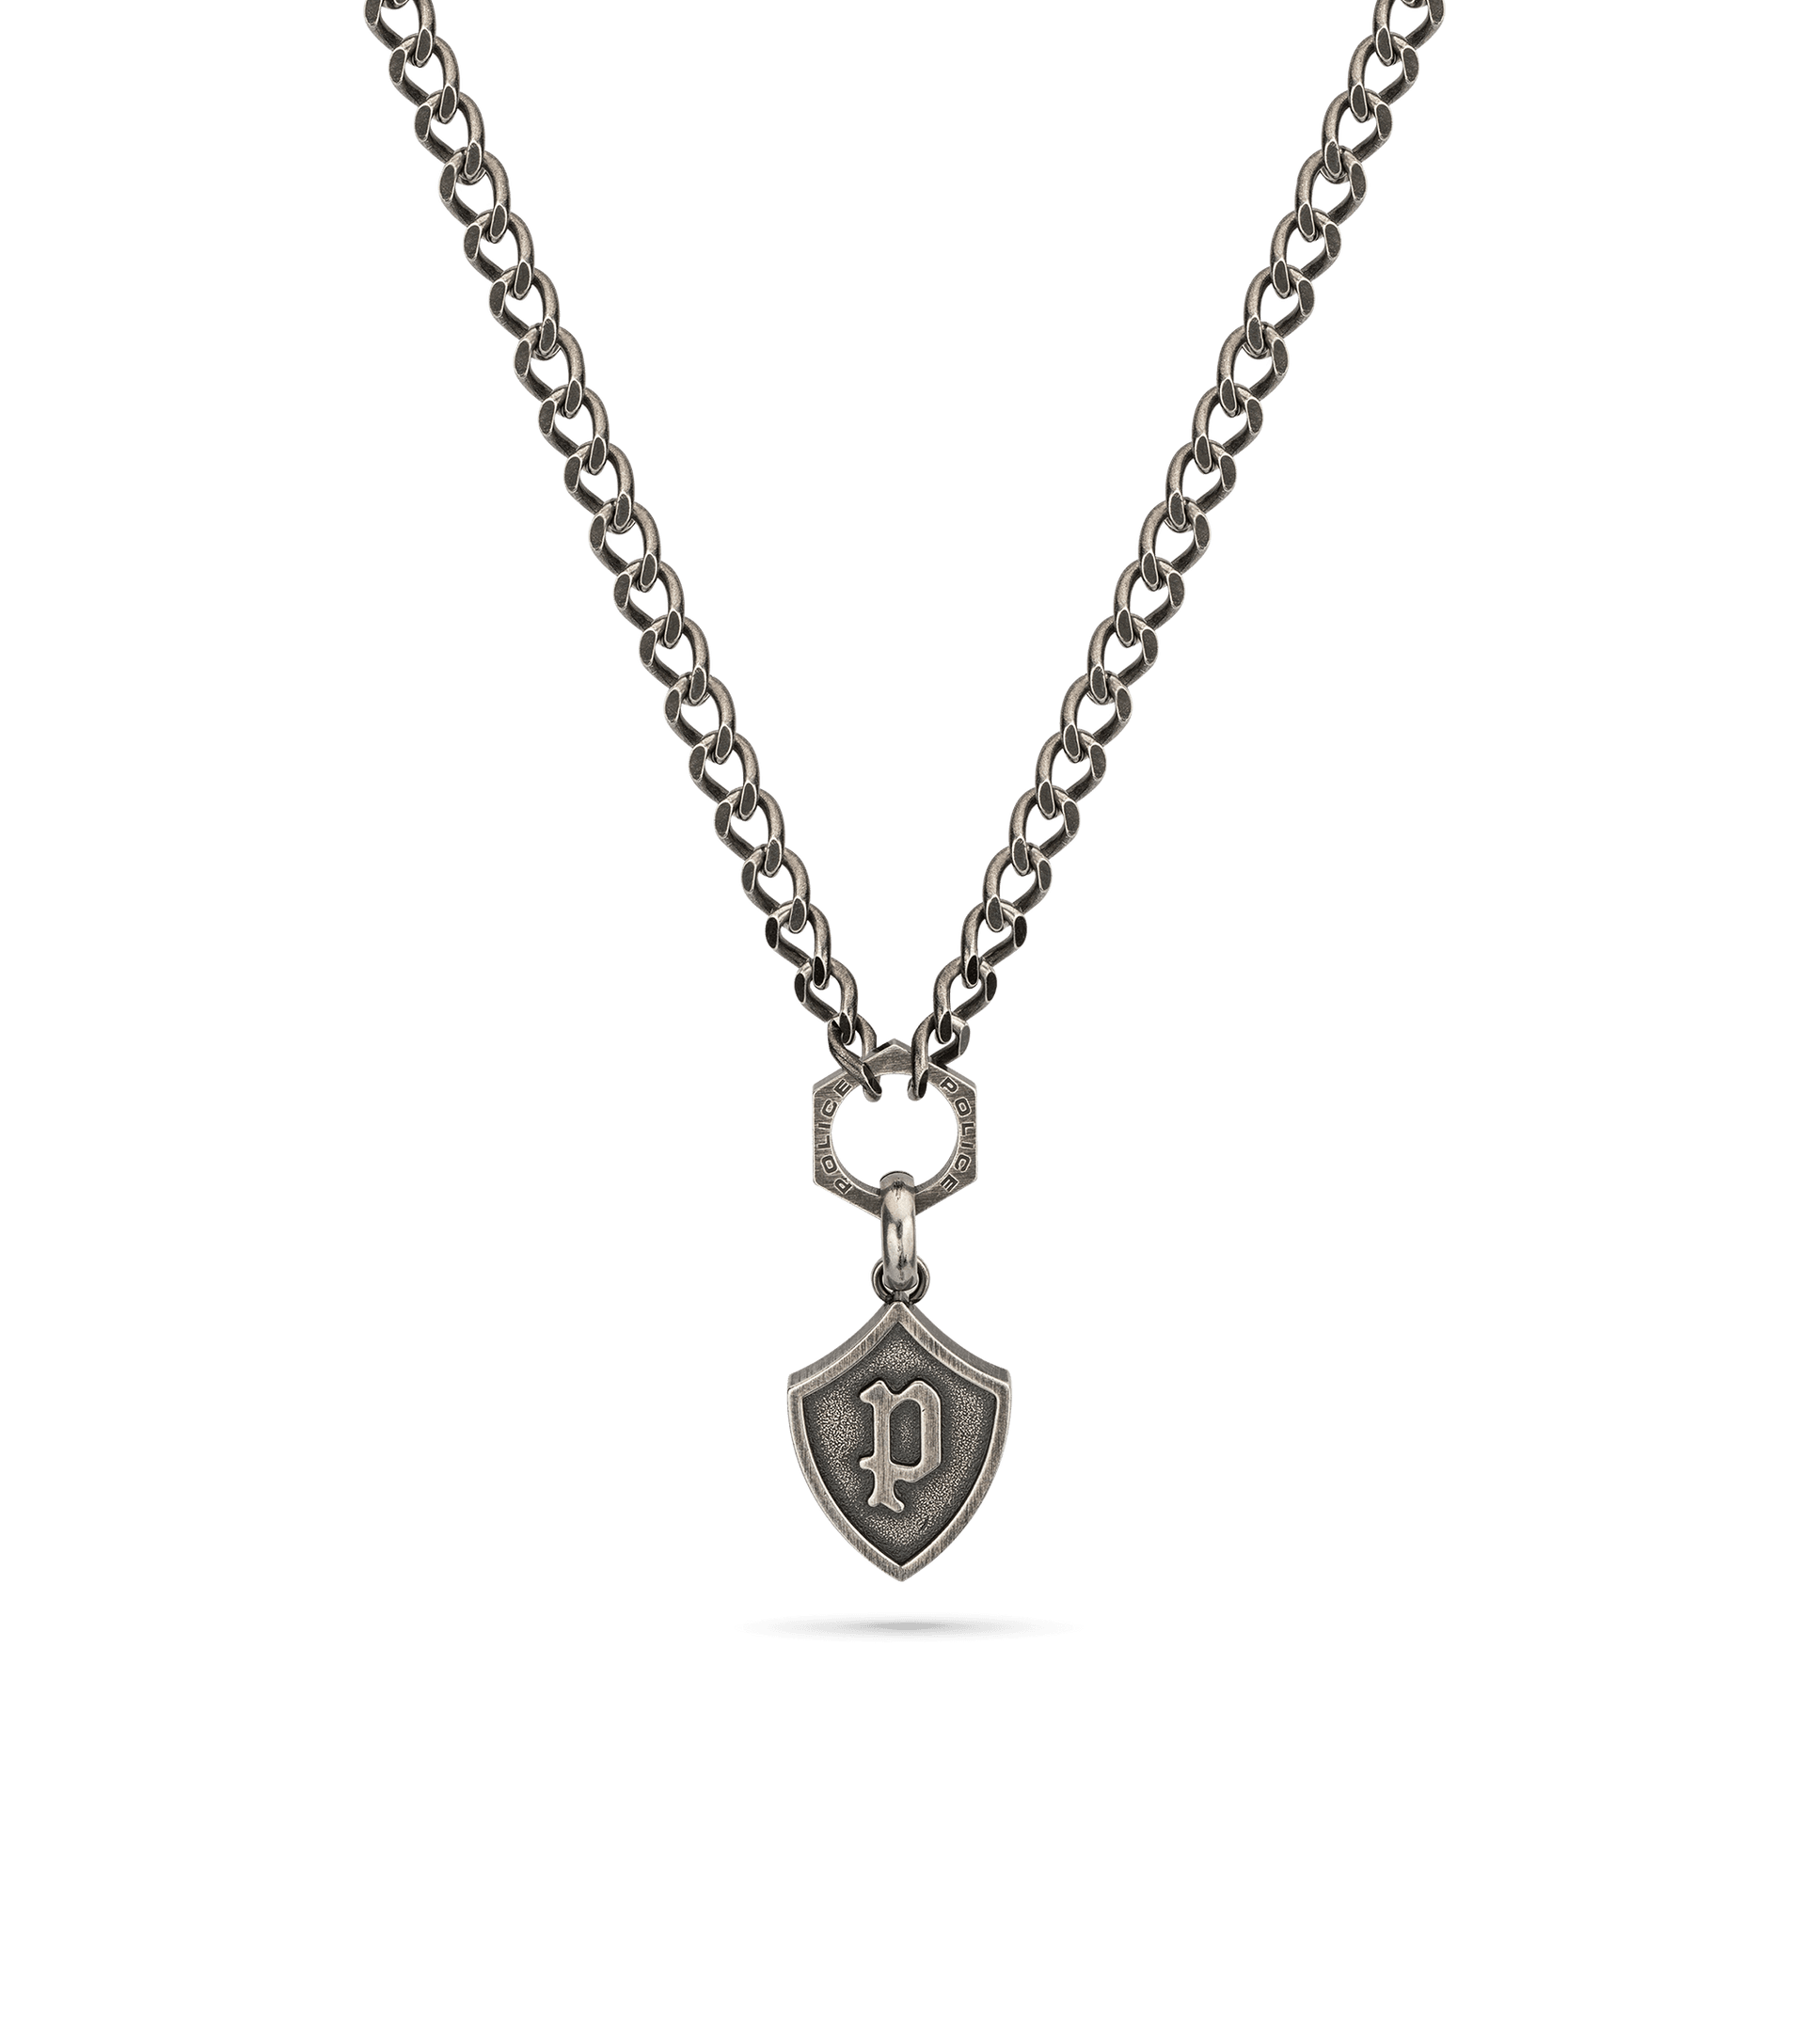 Police jewels - PEAGN2120211 For Edge Men Tribal By Necklace Police